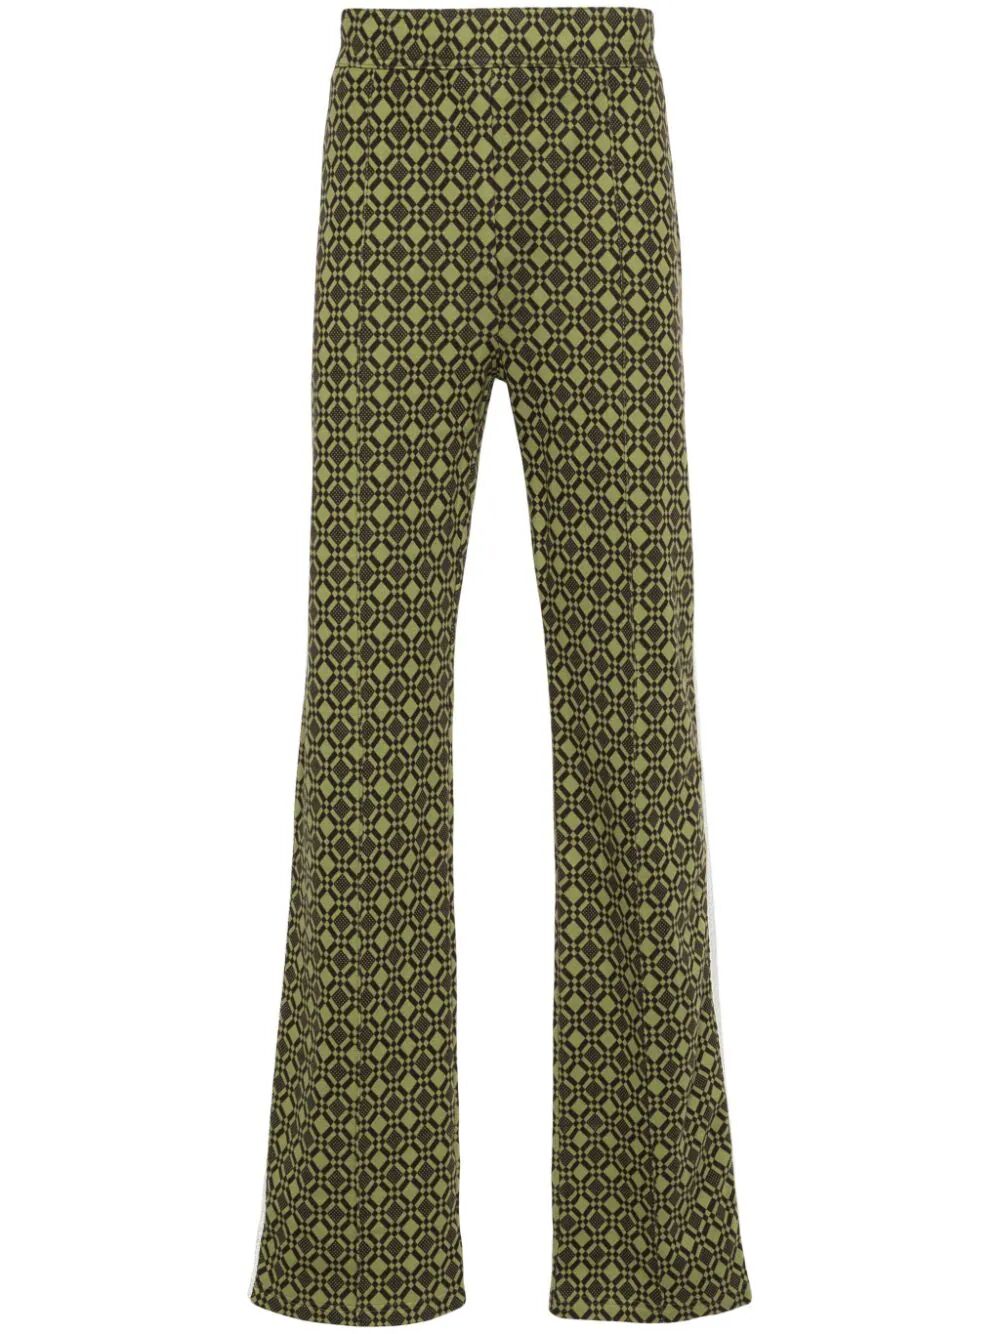 WALES BONNER-POWER TRACK TROUSERS-MS24JE26 JE070 7800 OLIVE AND DARK BROWN